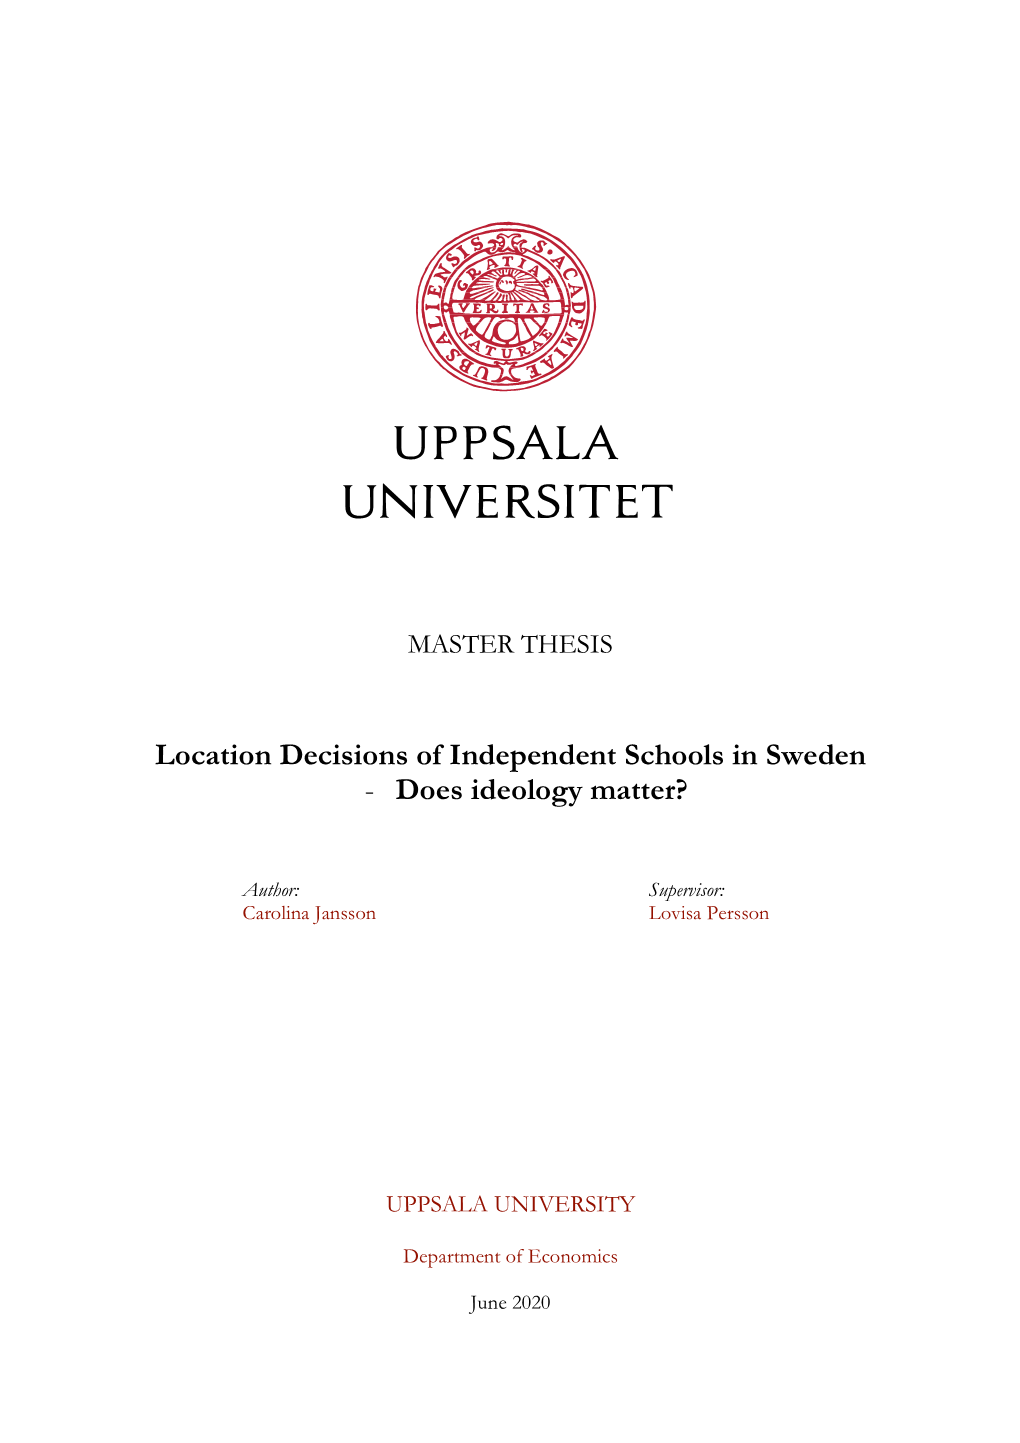 Location Decisions of Independent Schools in Sweden - Does Ideology Matter?